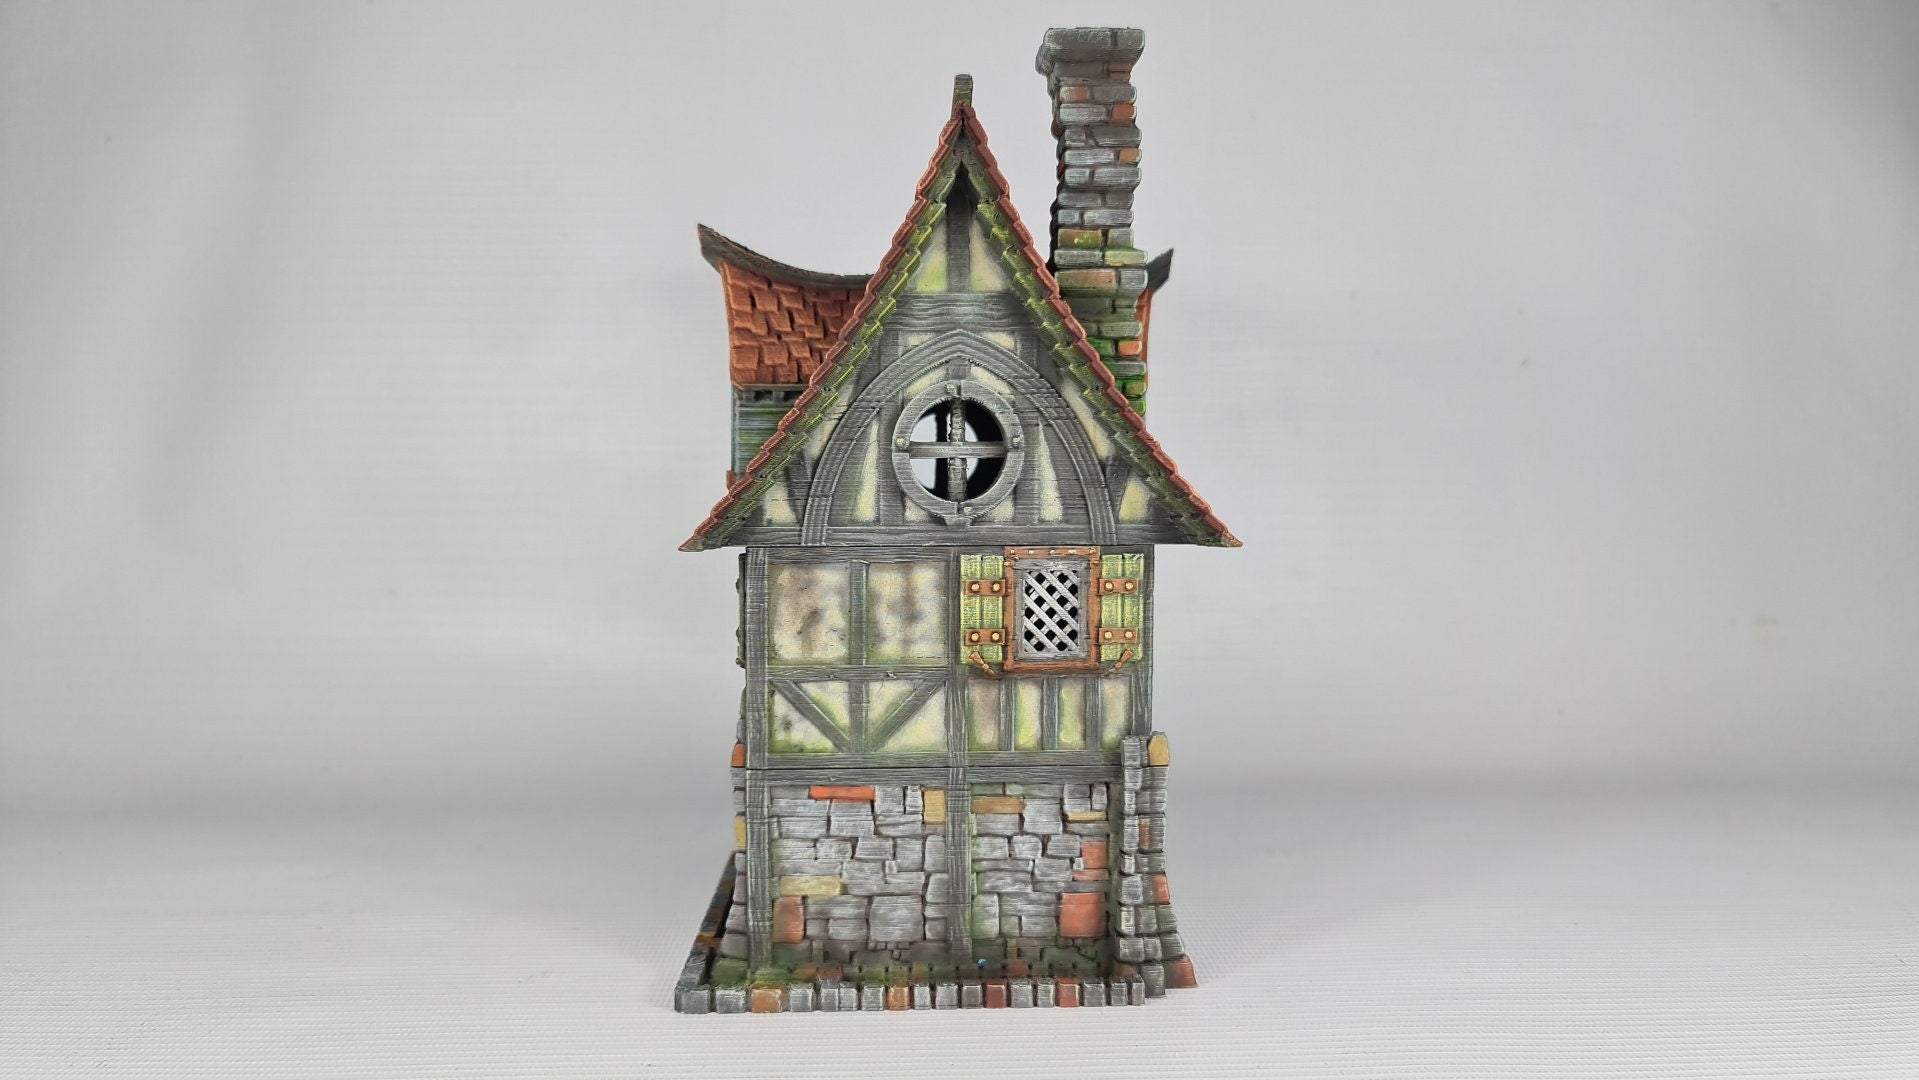 Beetroot House - 3DP4U Medieval Town | Miniature | Wargaming | Roleplaying Games | 32mm | Hut | Playable | Filament | 3d printed